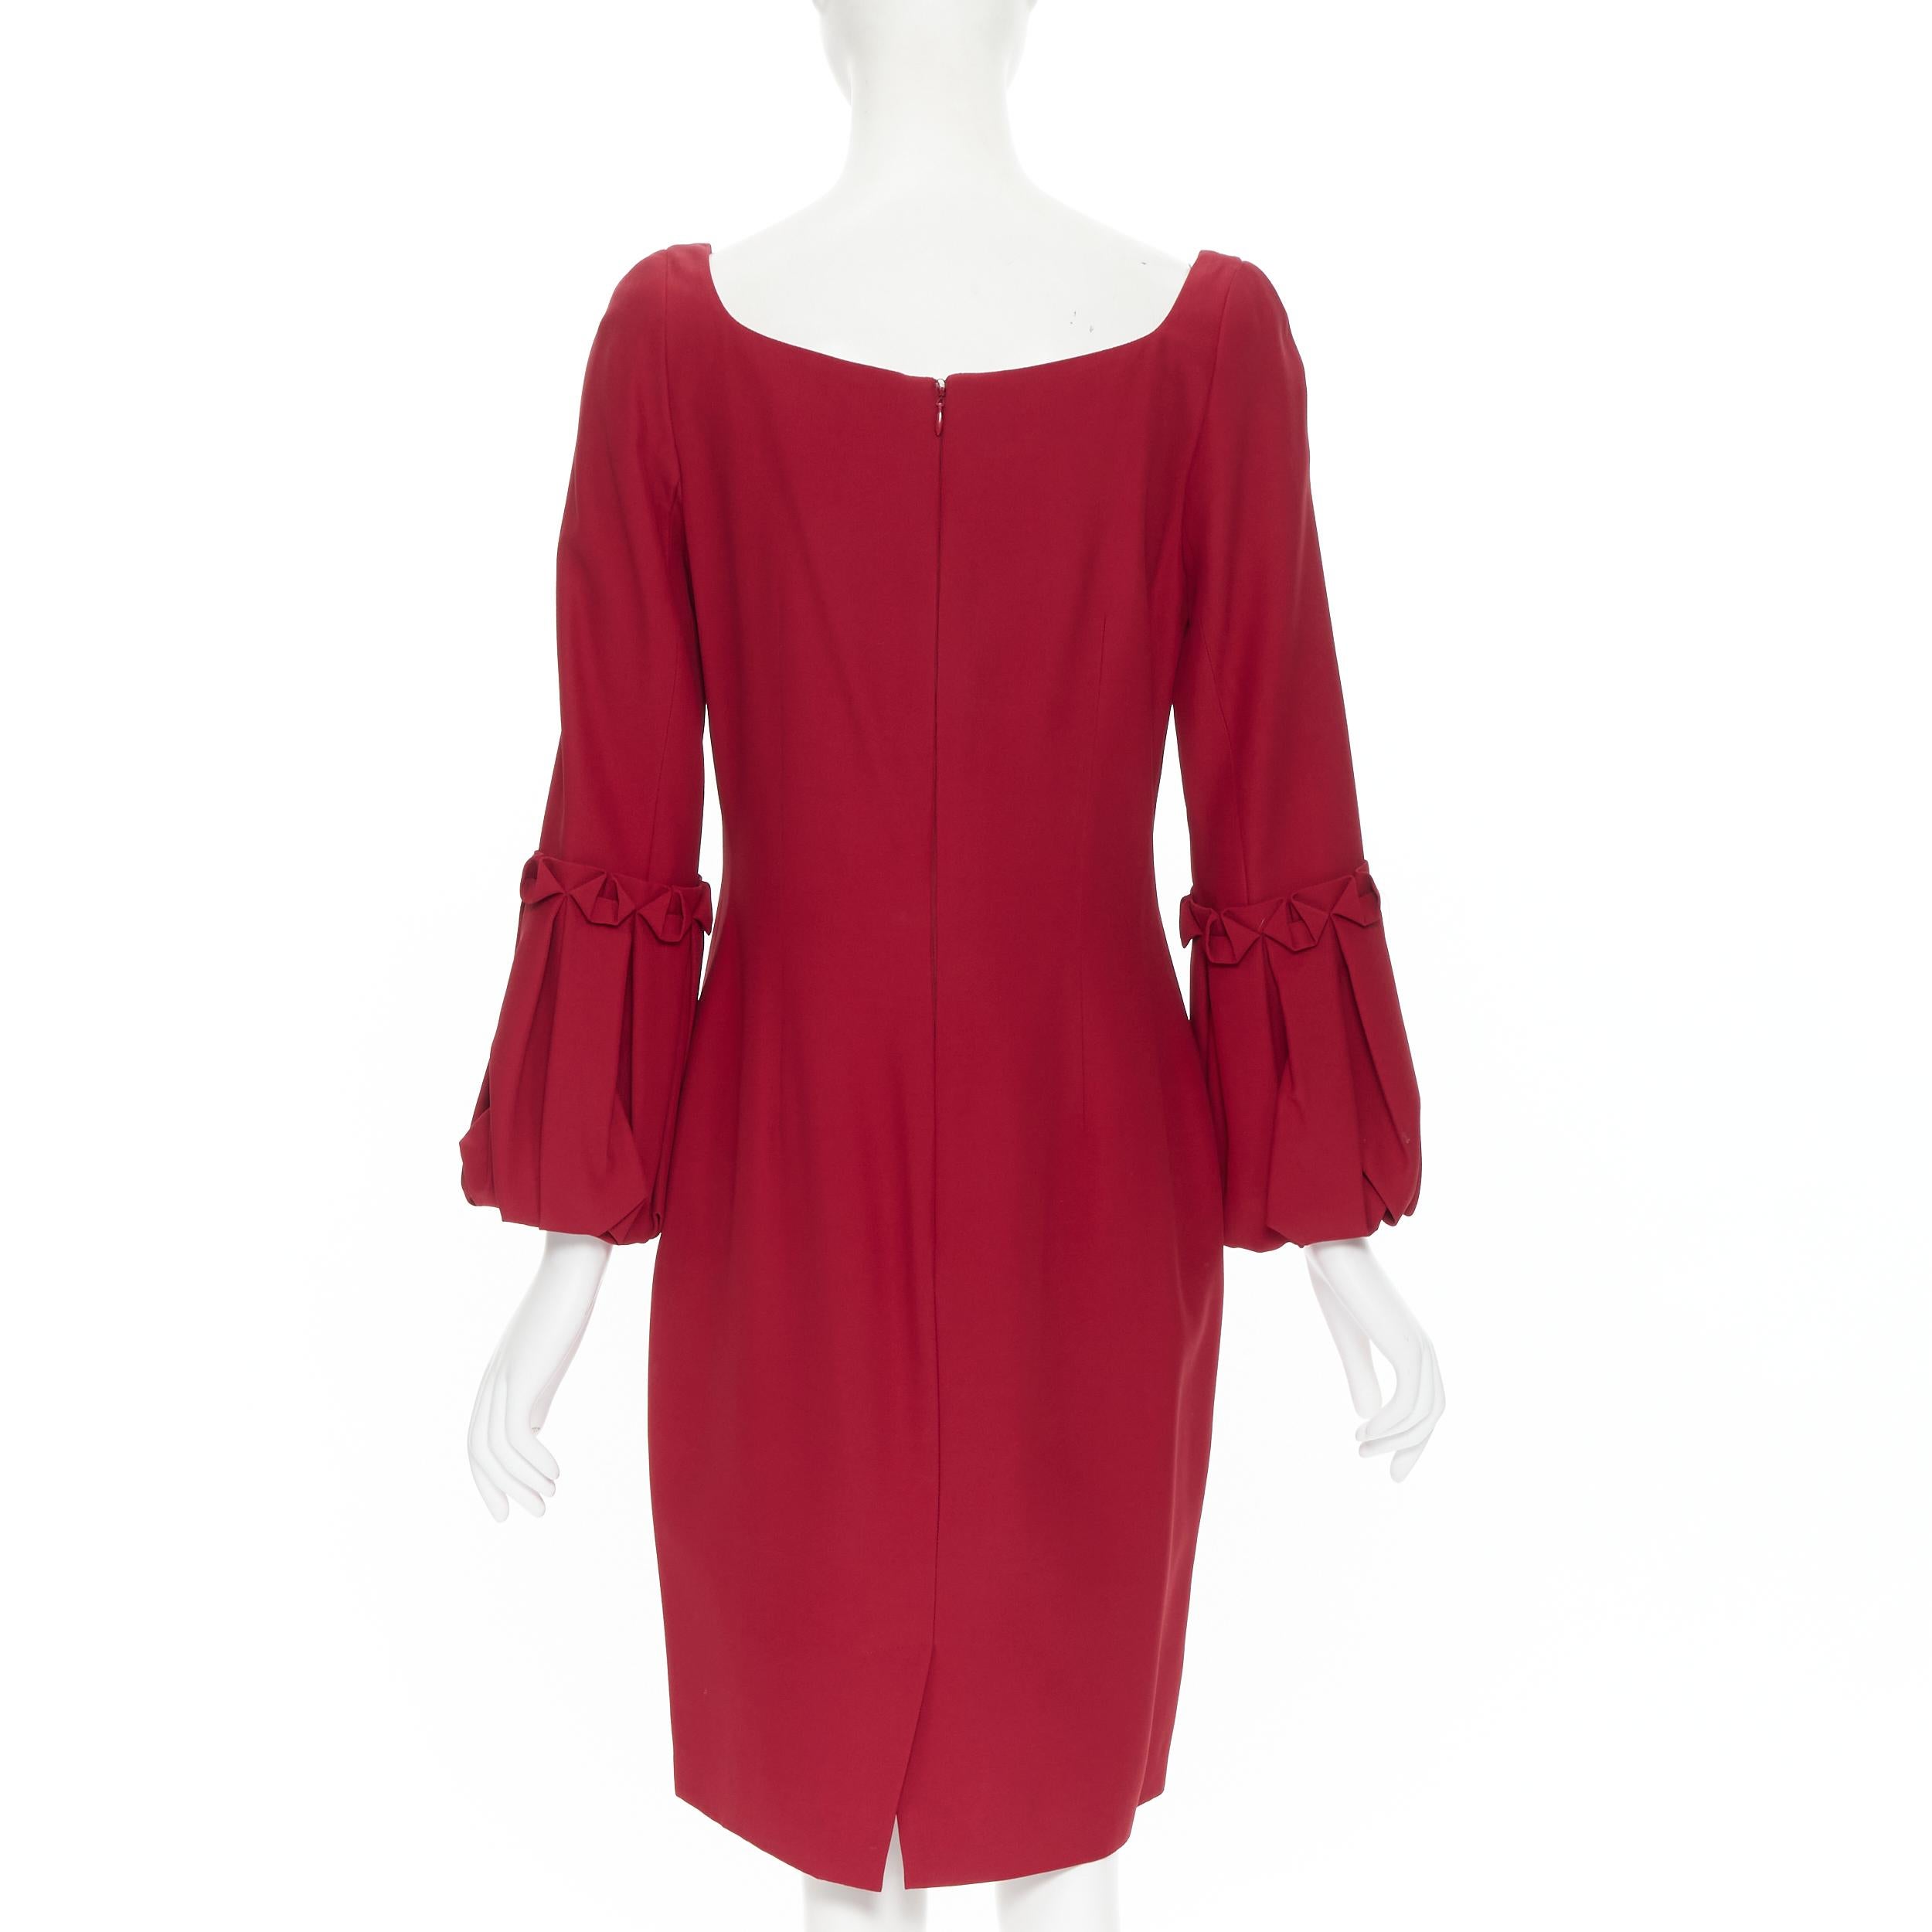 Women's ALEXANDER MCQUEEN red crepe bubble flared cuff cocktail dress IT44